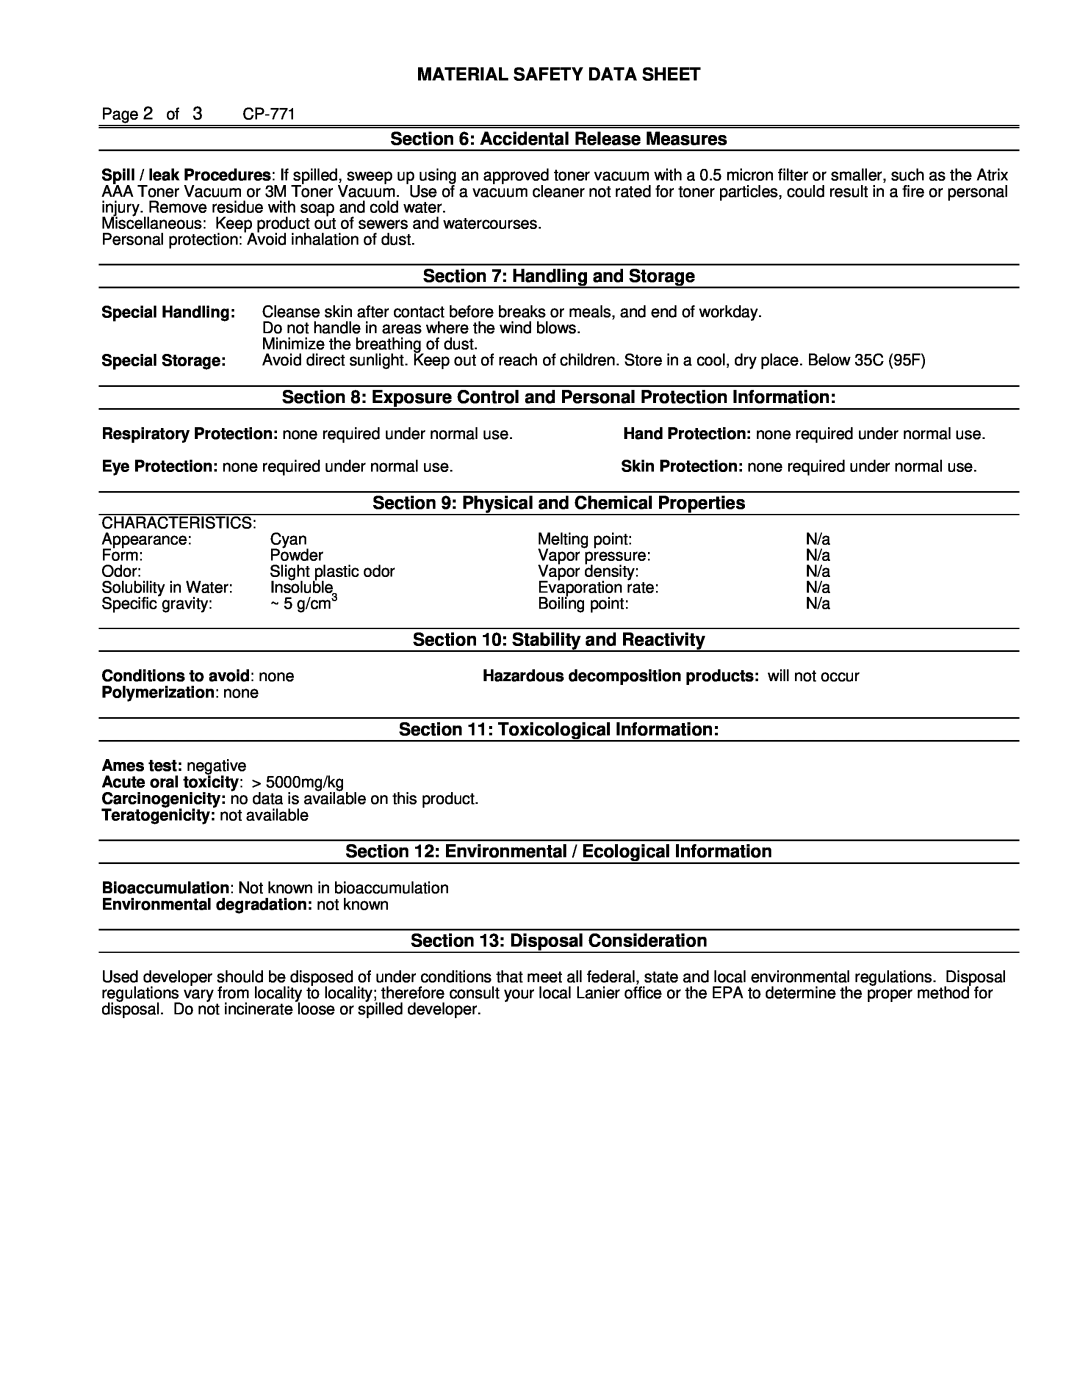 Lanier G08 Material Safety Data Sheet, Accidental Release Measures, Handling and Storage, Physical and Chemical Properties 